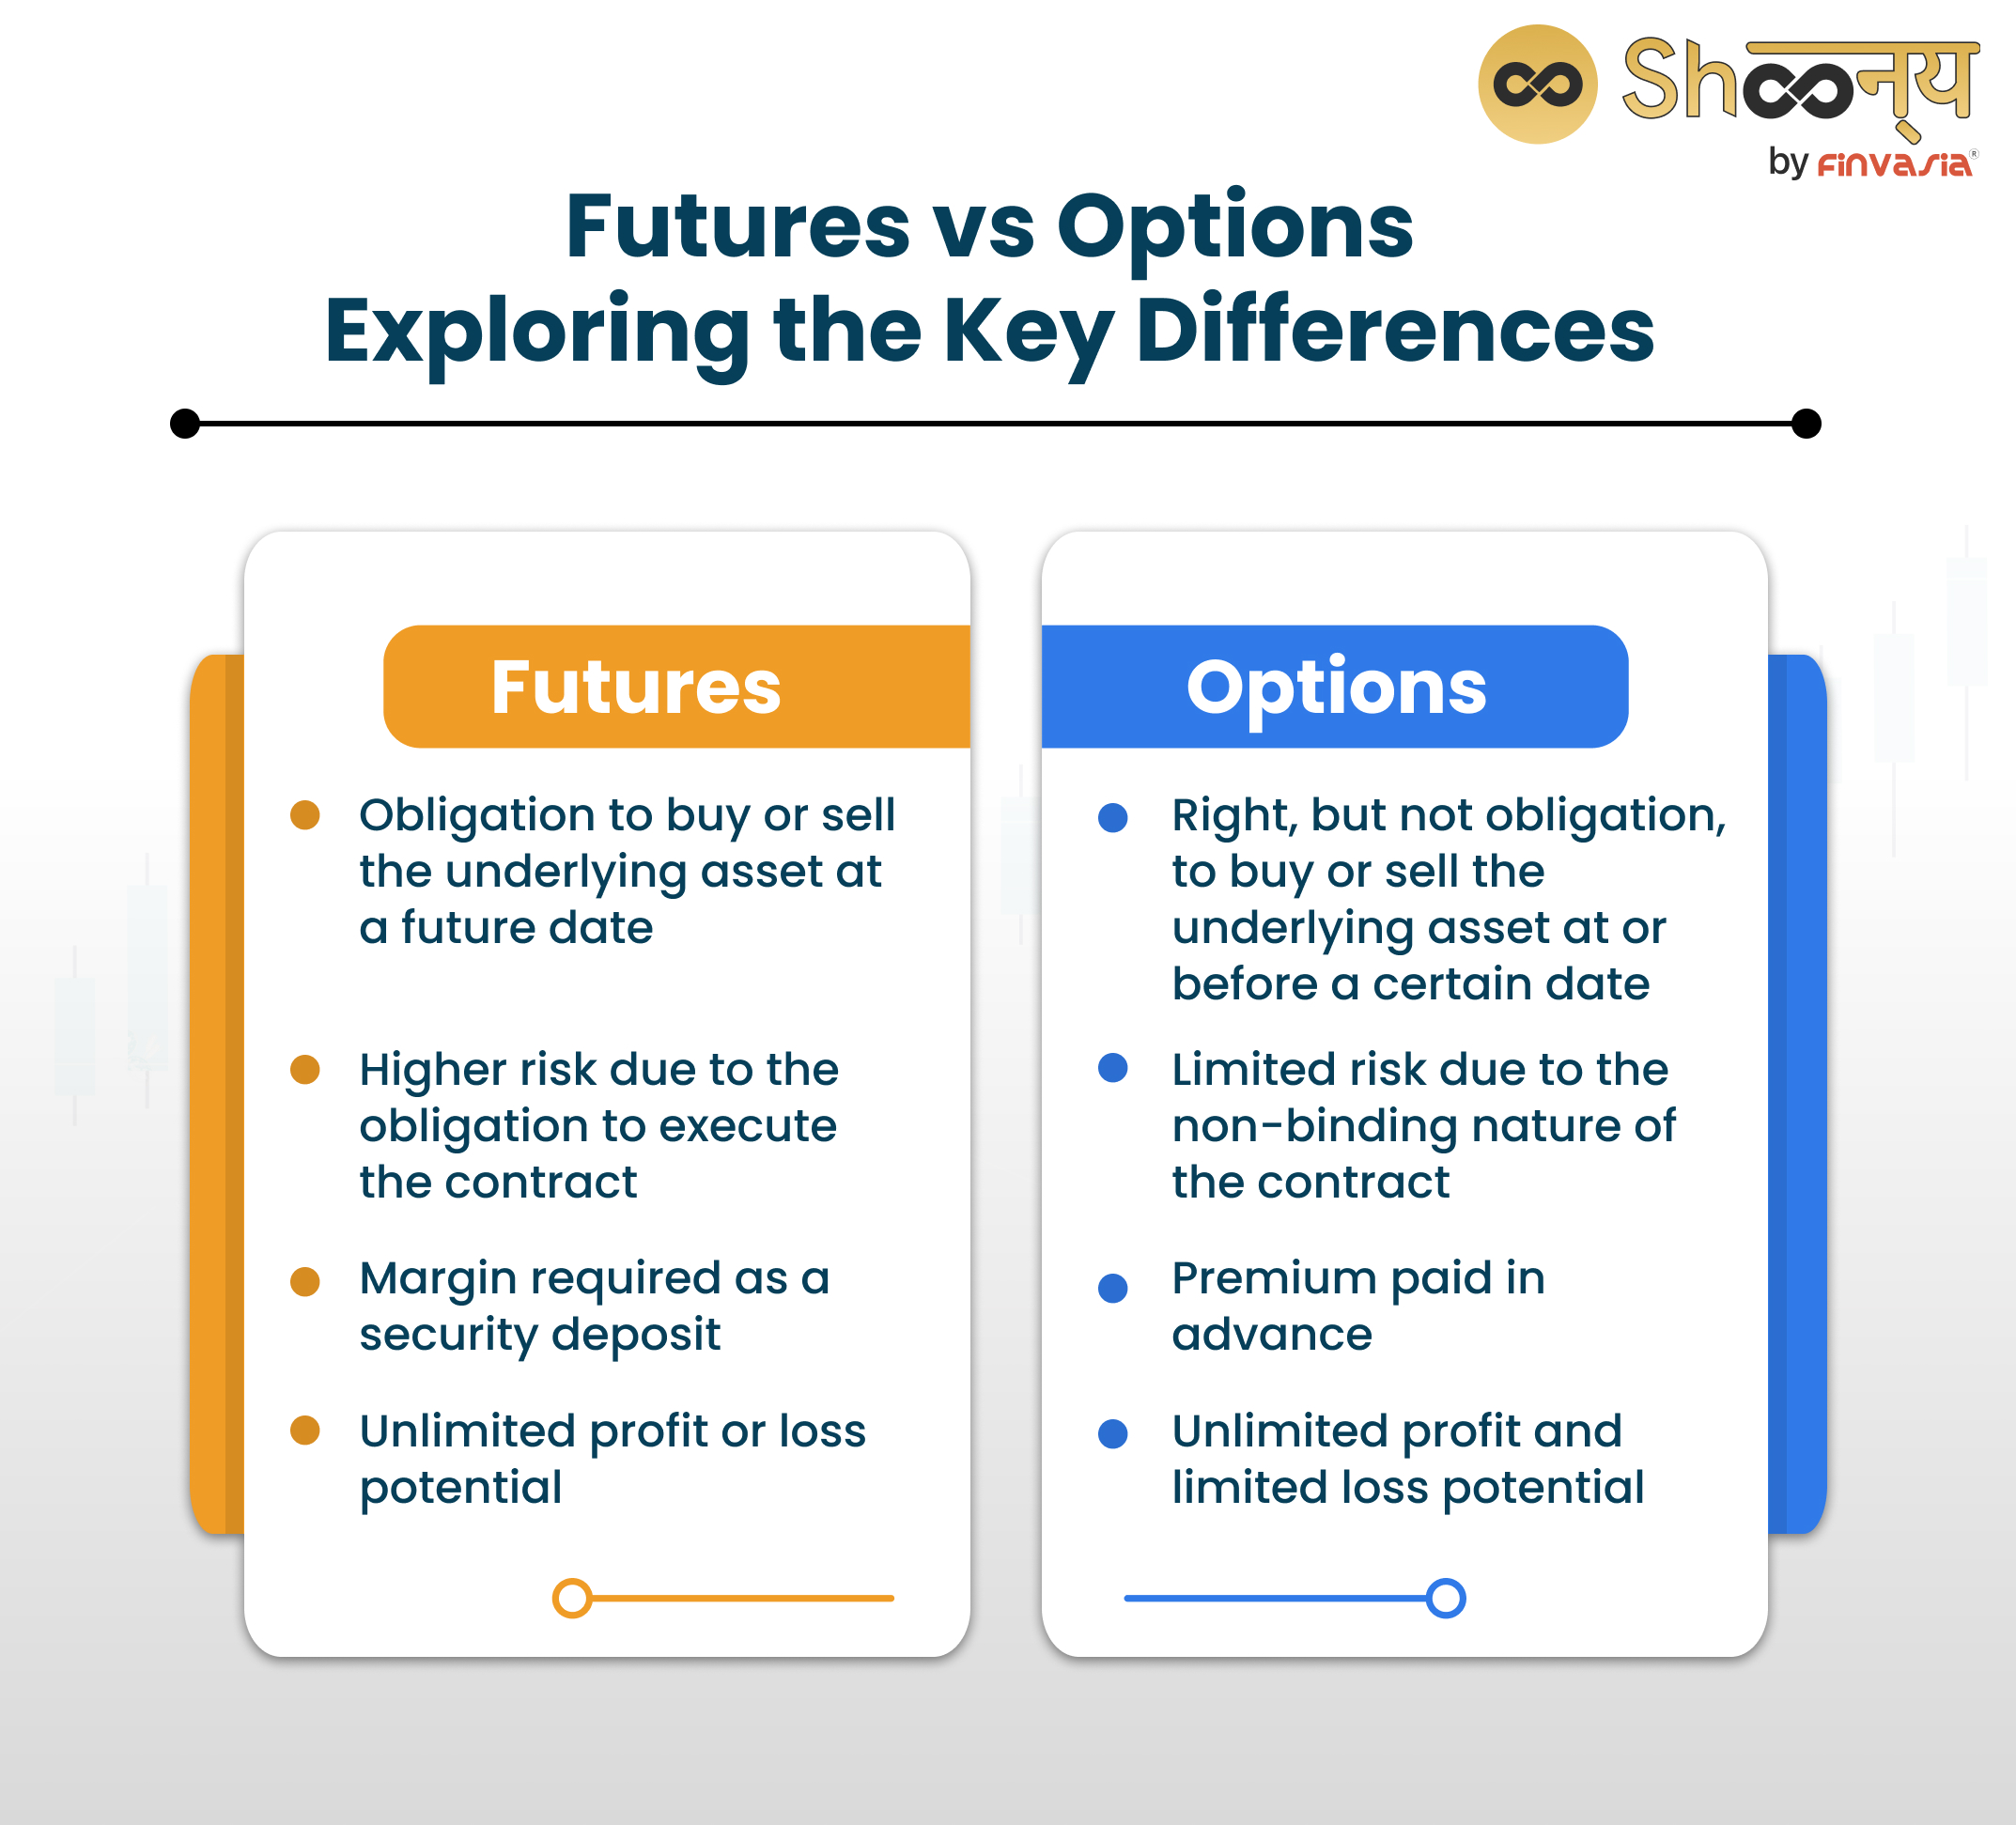 Futures vs Options: Exploring the Key Differences